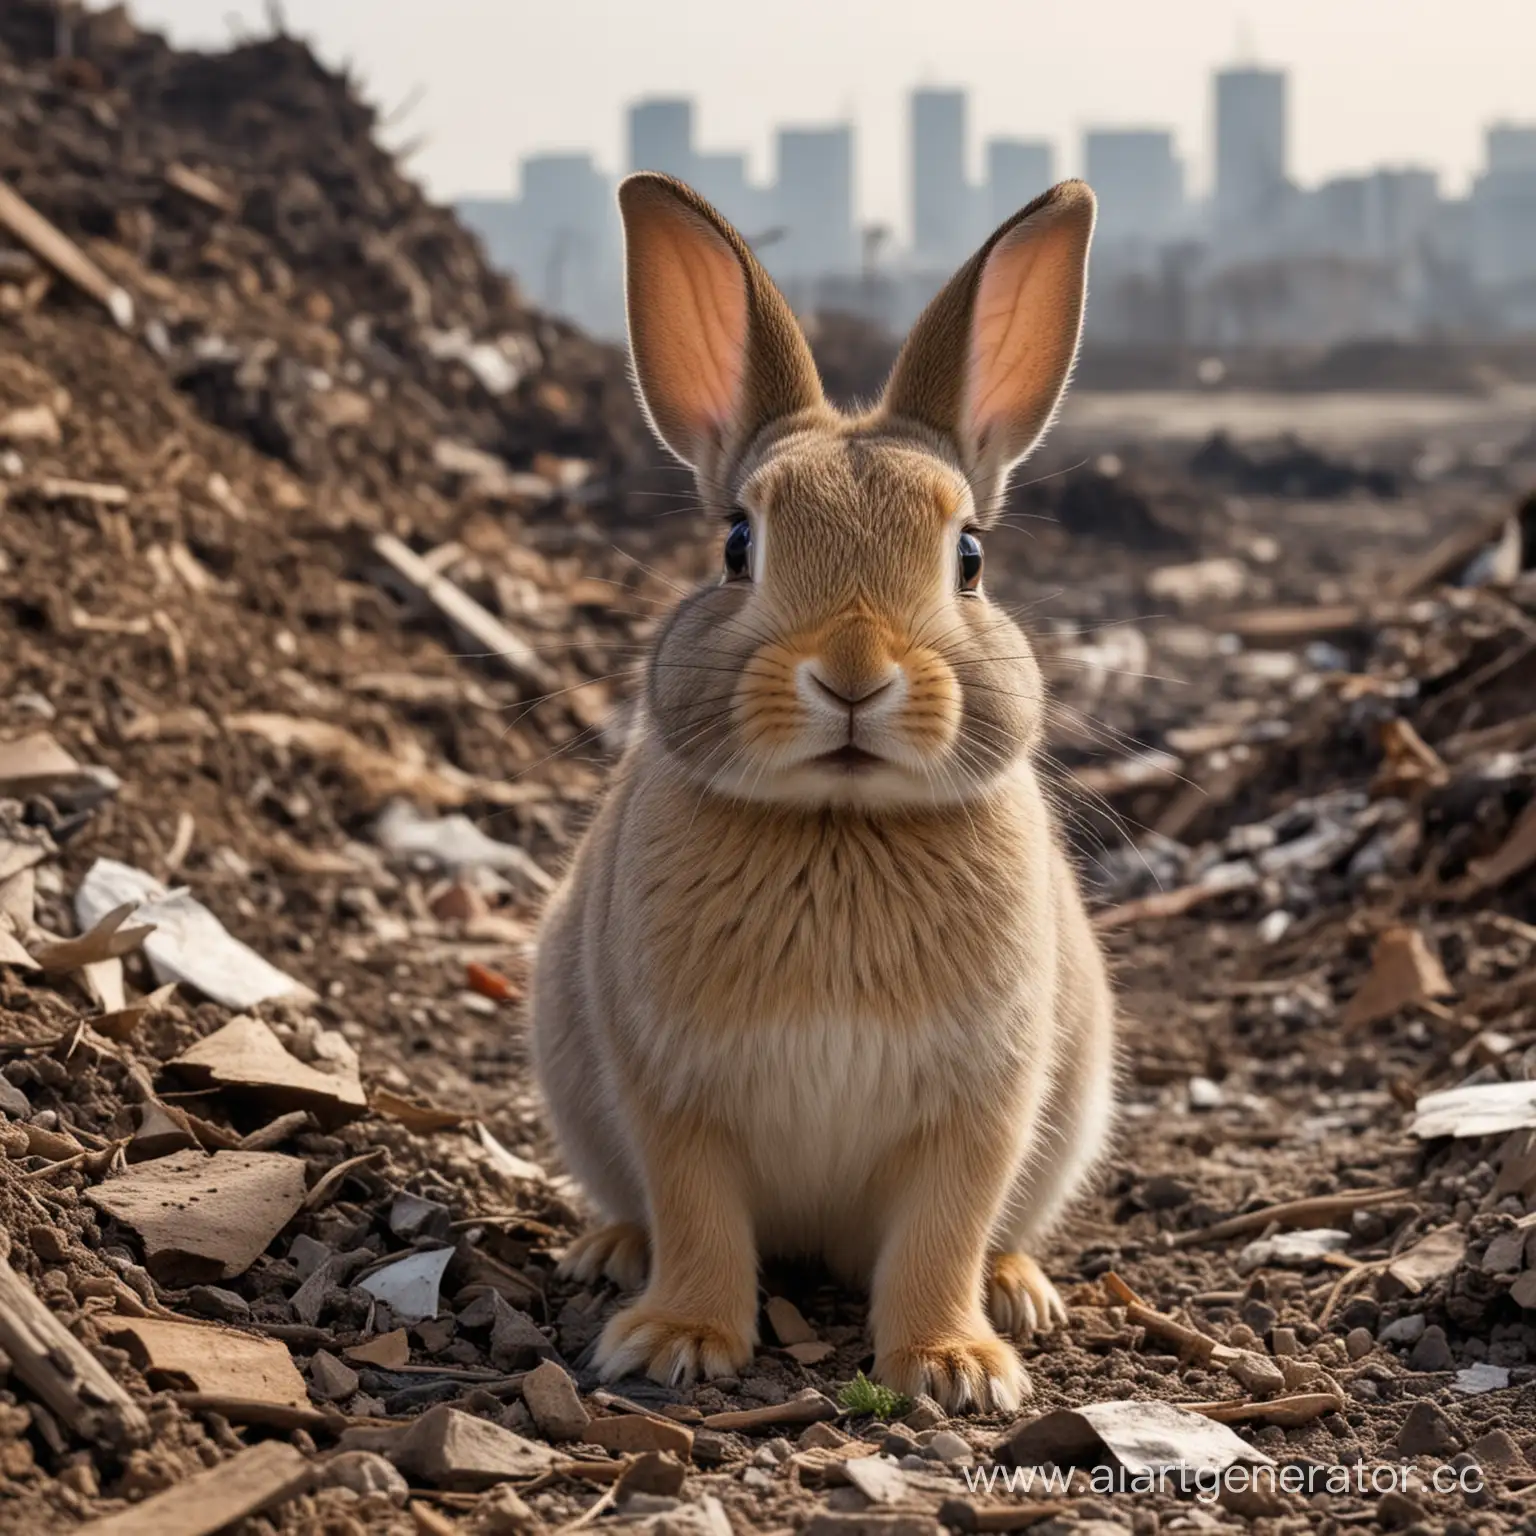 Rabbit-Encountering-Urban-Pollution-and-Waste